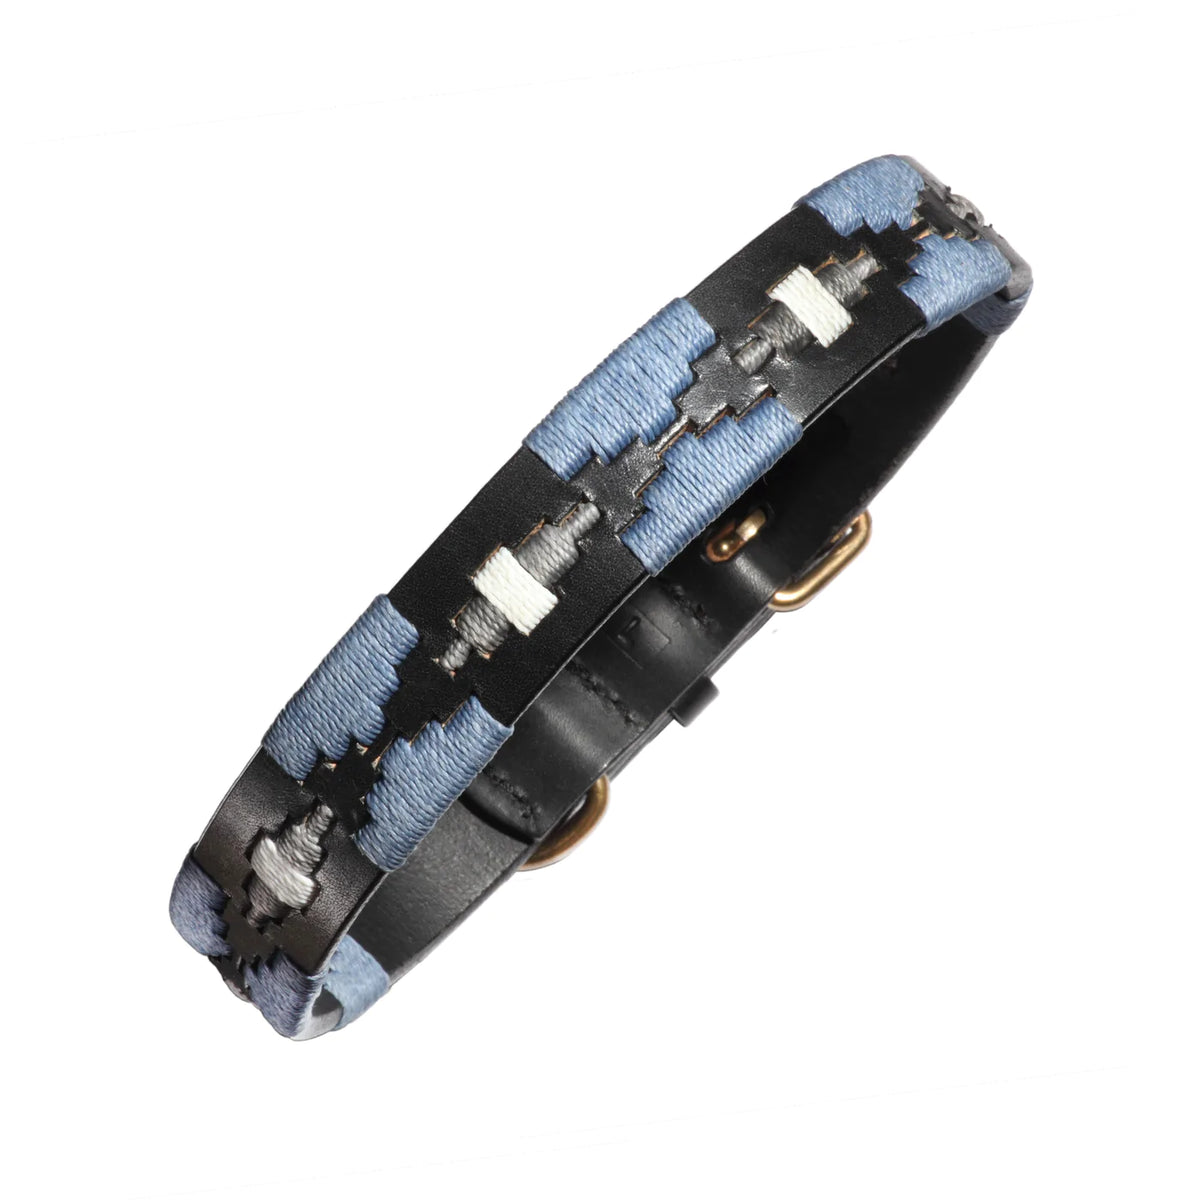 Sierra Dog Collar by Pampeano - Black leather with blue &amp; white